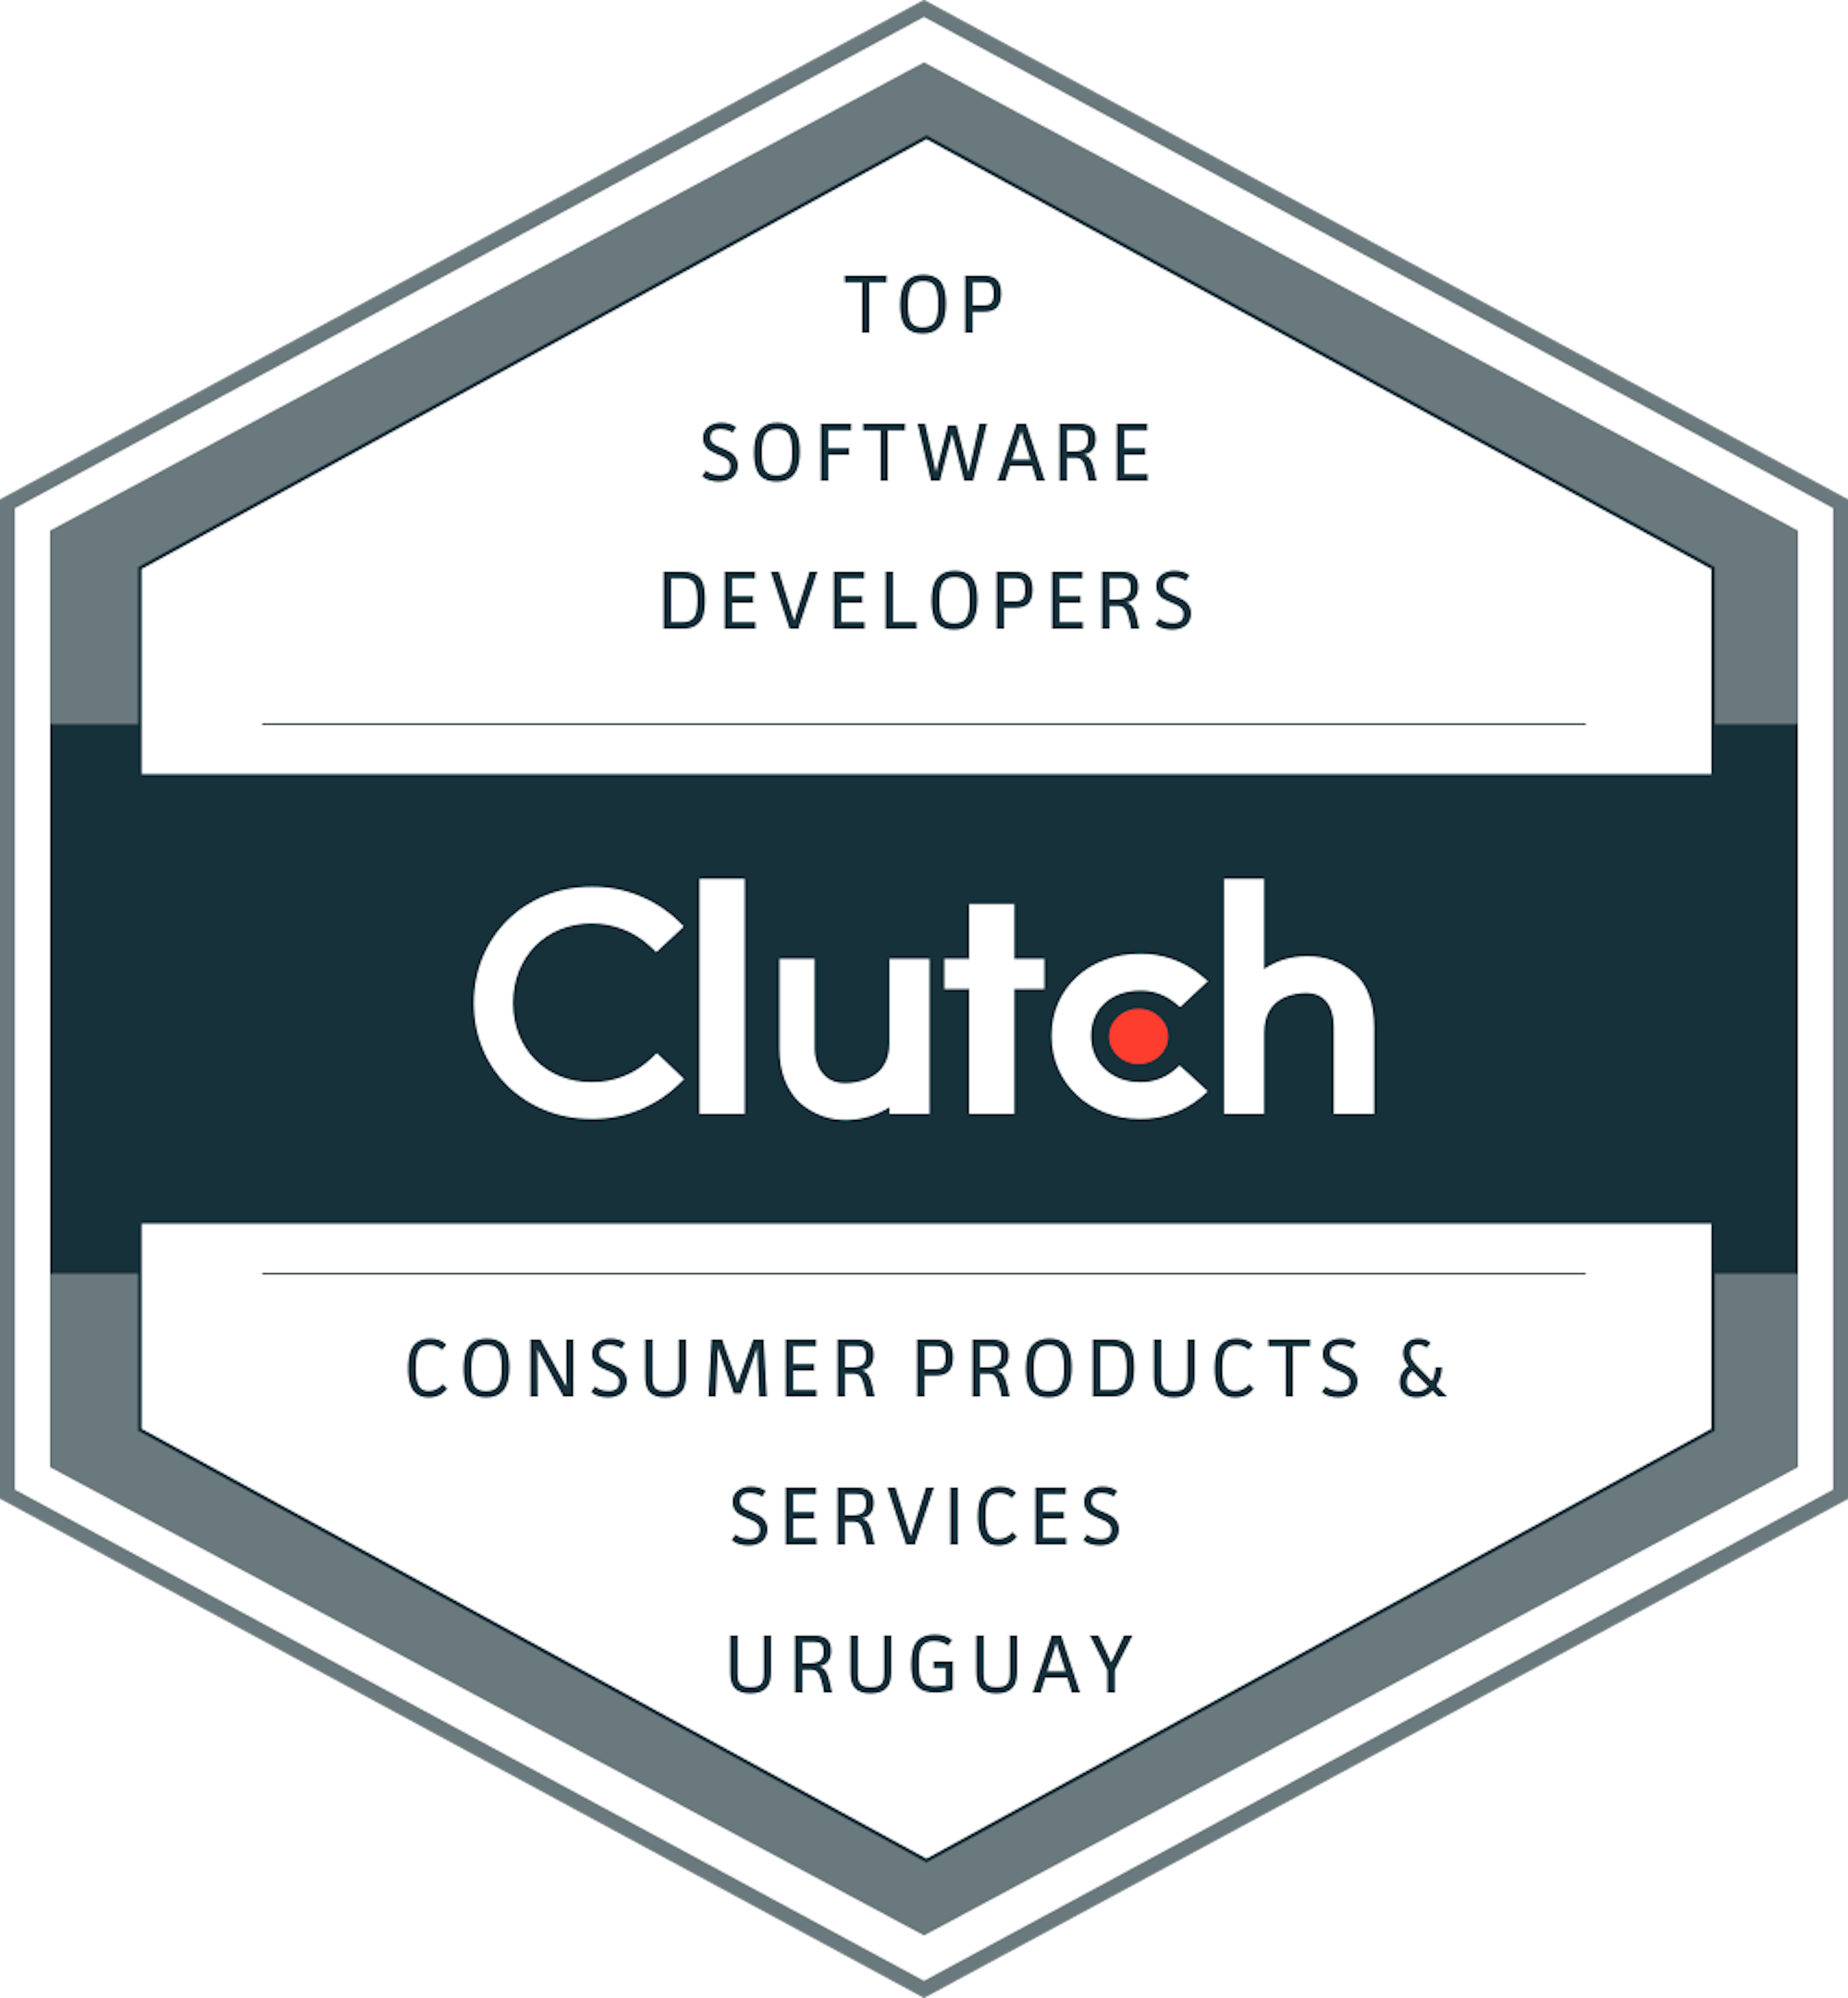 2020 - Top Software Developers Consumer Products Services Uruguay